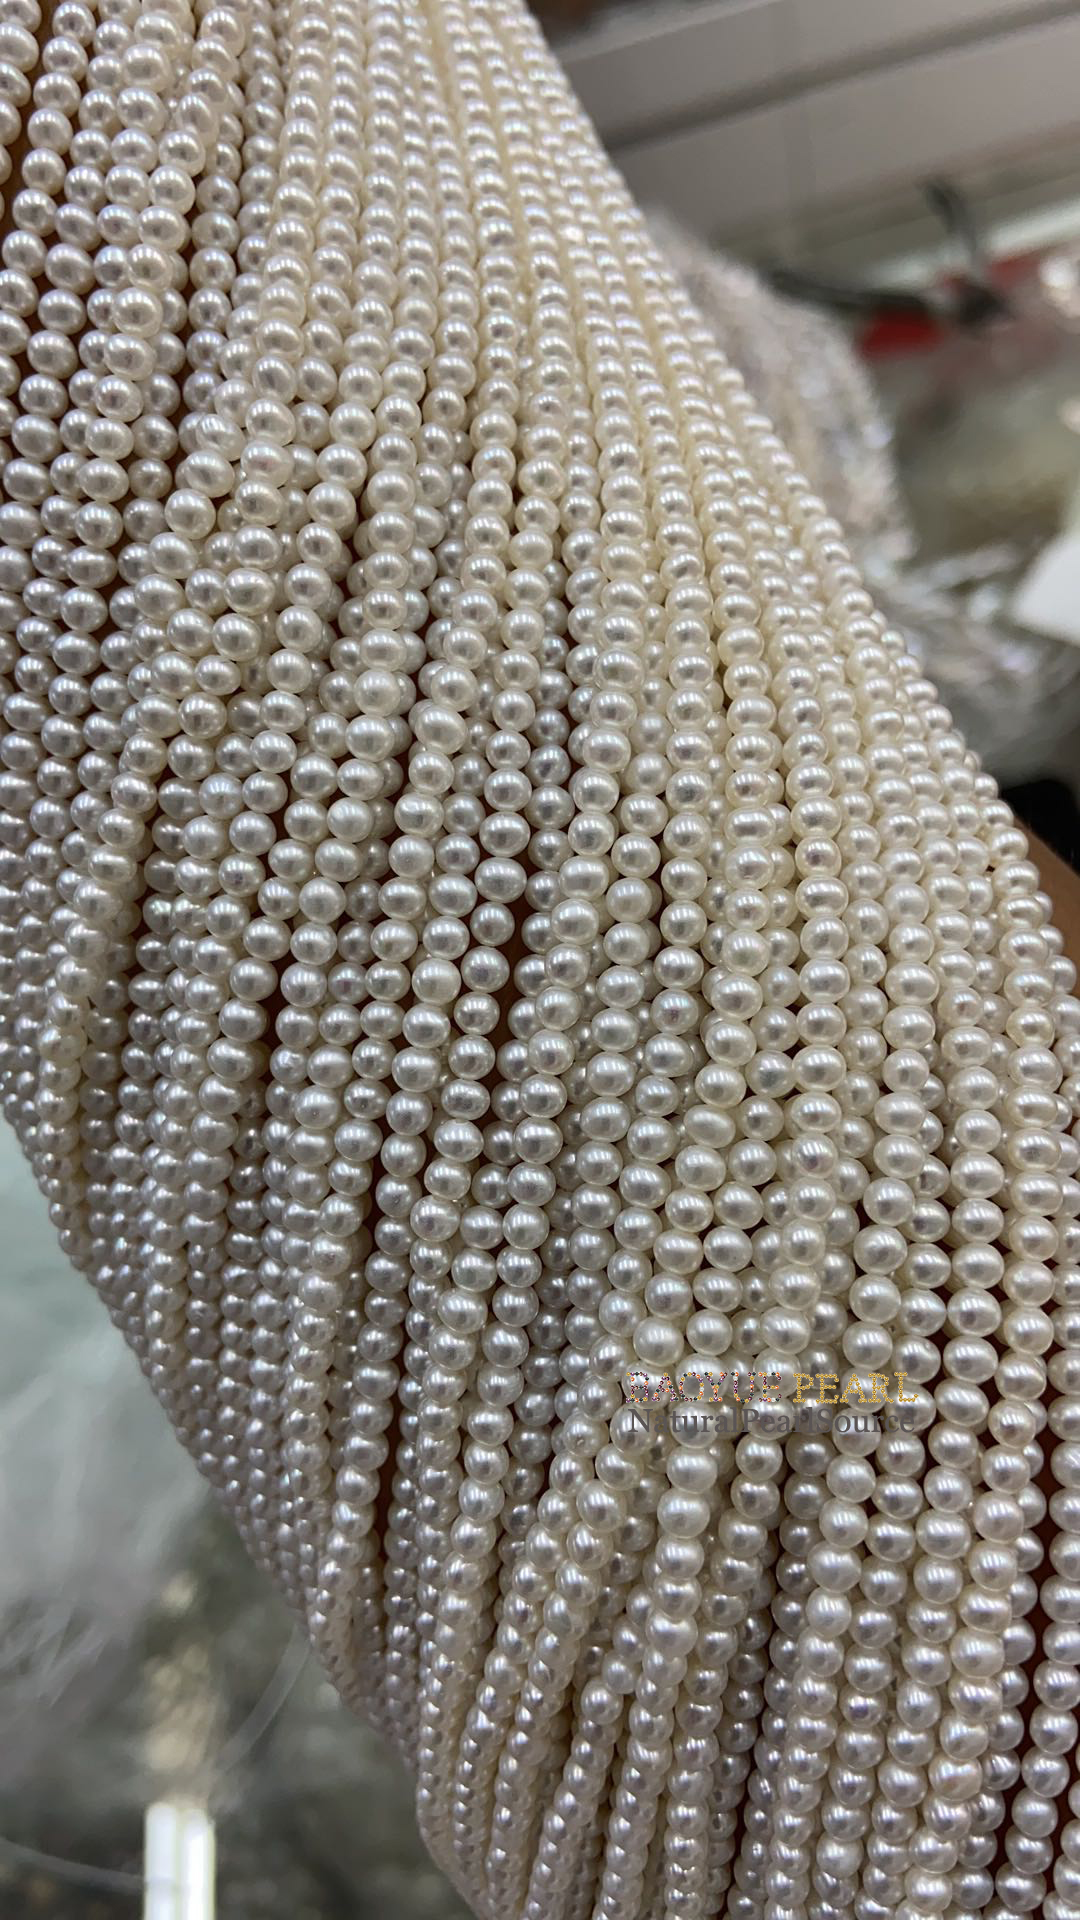 2-3 mm AAAA pearl wholesale freshwater high quality perfect round loose pearl in strand